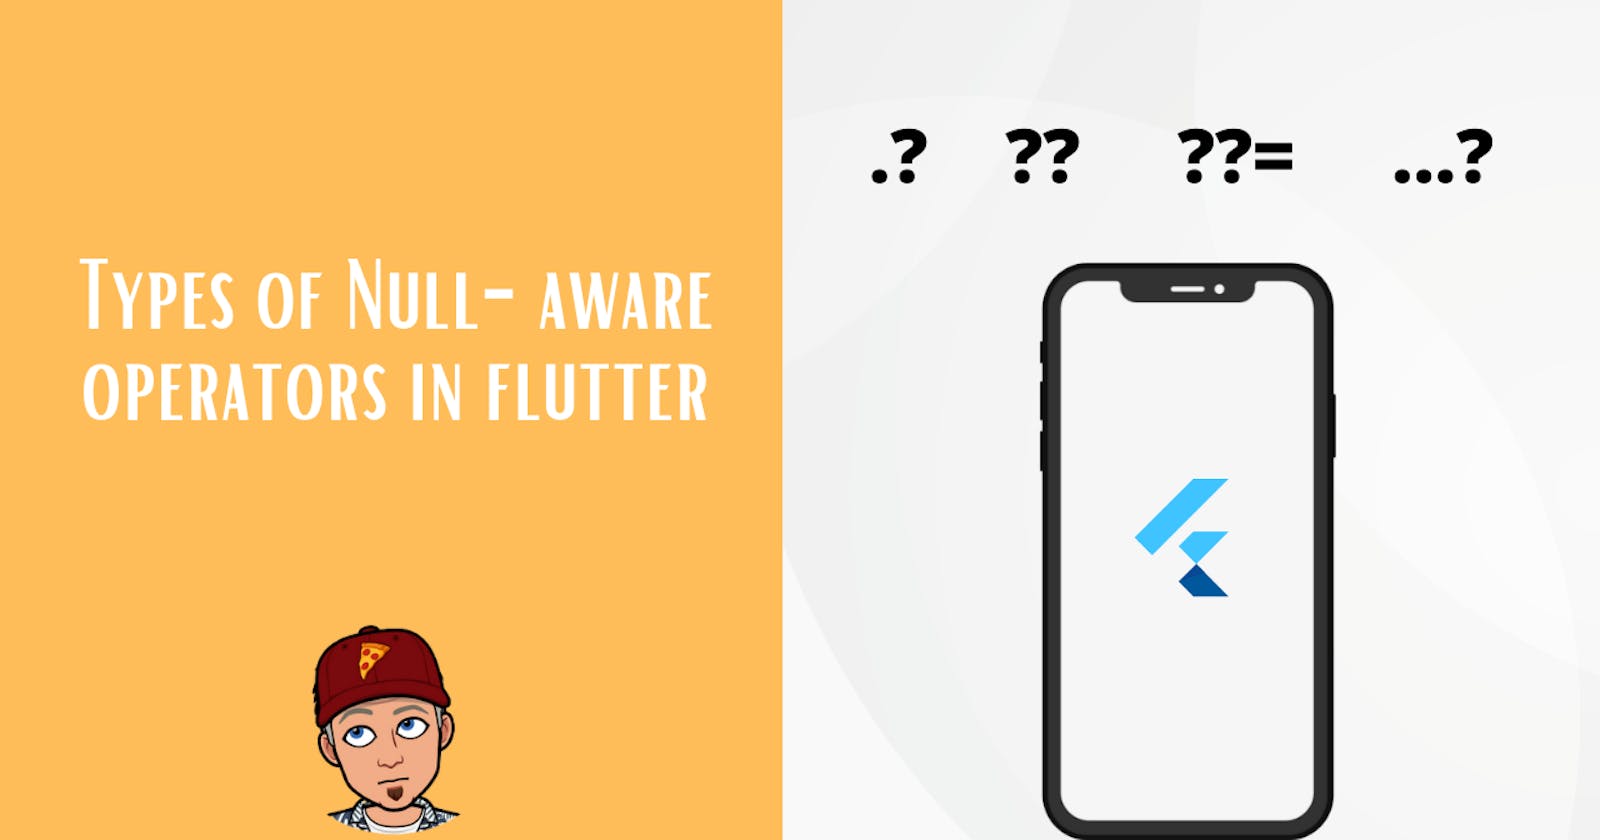 What are null-aware operators in Flutter/Dart? A guide on different types of null-aware operators.